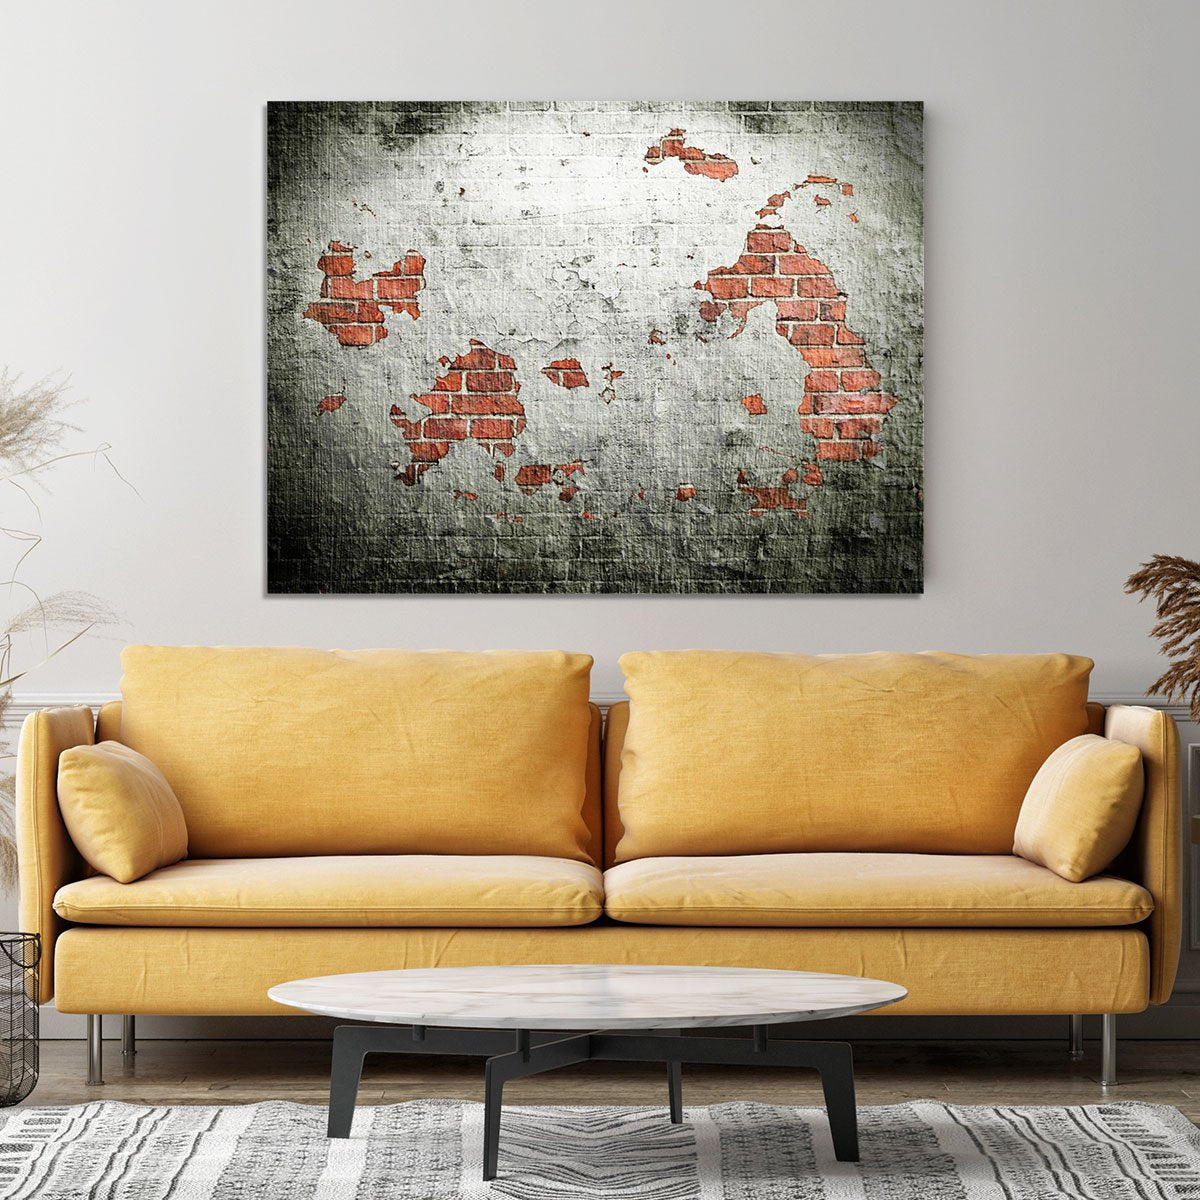 Grunge wall background Canvas Print or Poster